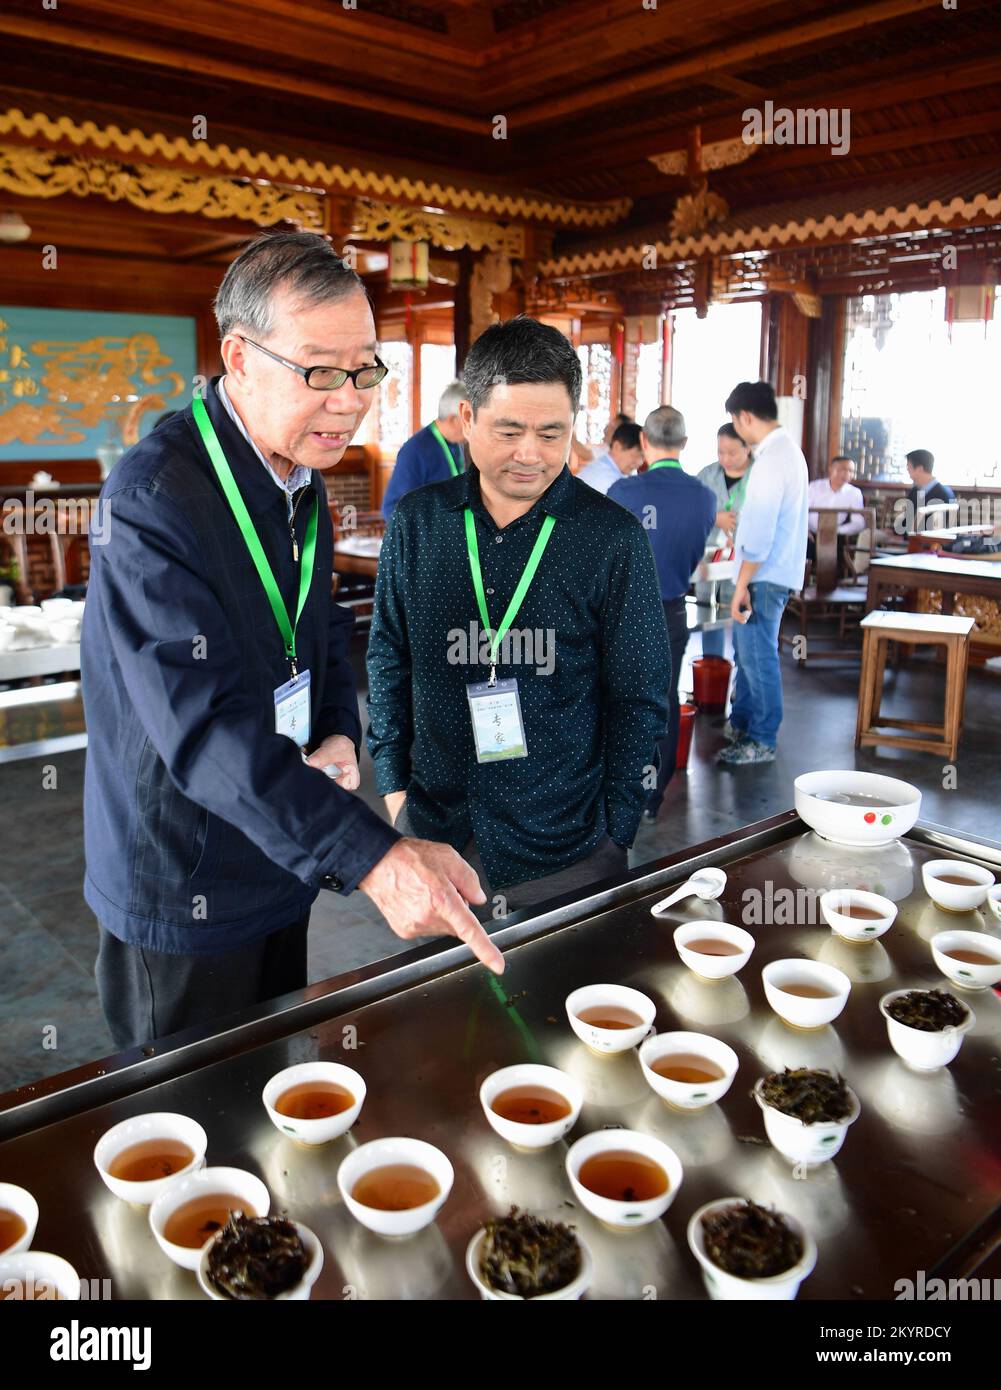 WUYISHAN, Dec. 2, 2022 (Xinhua) -- Ye Qitong (1st L), a national inheritor of Wuyi rock tea making technique, comments on tea at a tea tasting competition in Wuyishan, southeast China's Fujian Province, Oct. 28, 2017. Wuyishan, the hometown of rock tea, boasts a wide range of rock tea varieties. The making technique of Wuyi rock tea, a special oolong variety with a particularly roasted taste and floral and fruity aroma, is comprised of more than 10 processing procedures including tea harvesting, withering, fixation, twisting, drying and so on. Inherited and developed with a long h Stock Photo